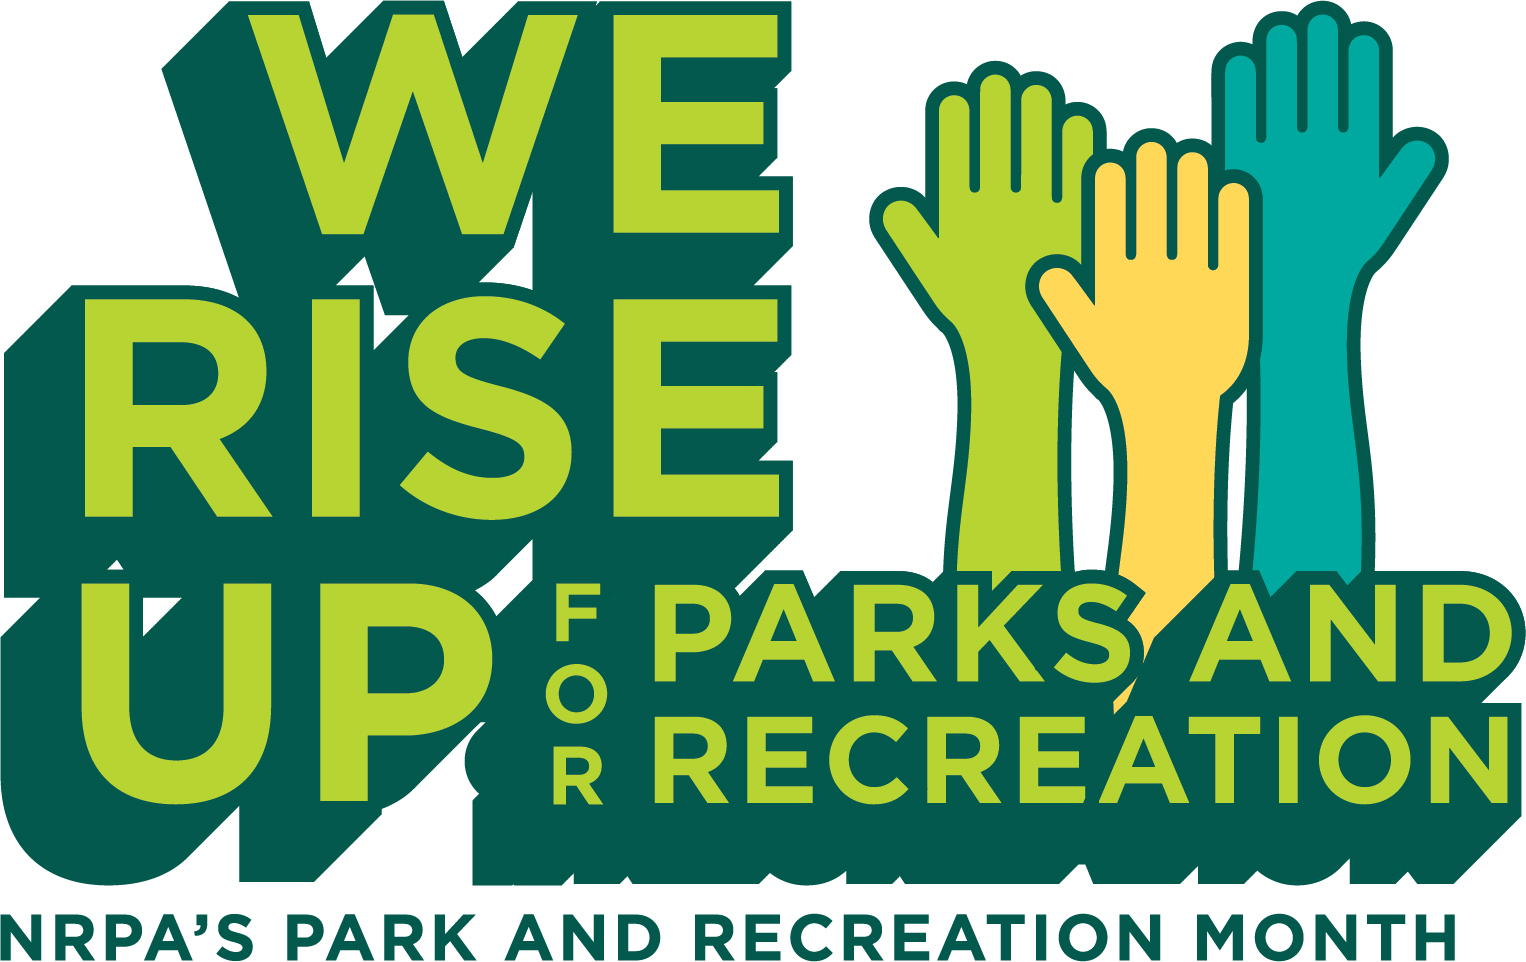 "We rise up for Parks and Recreation: NRPA's Park and Recreation Month"